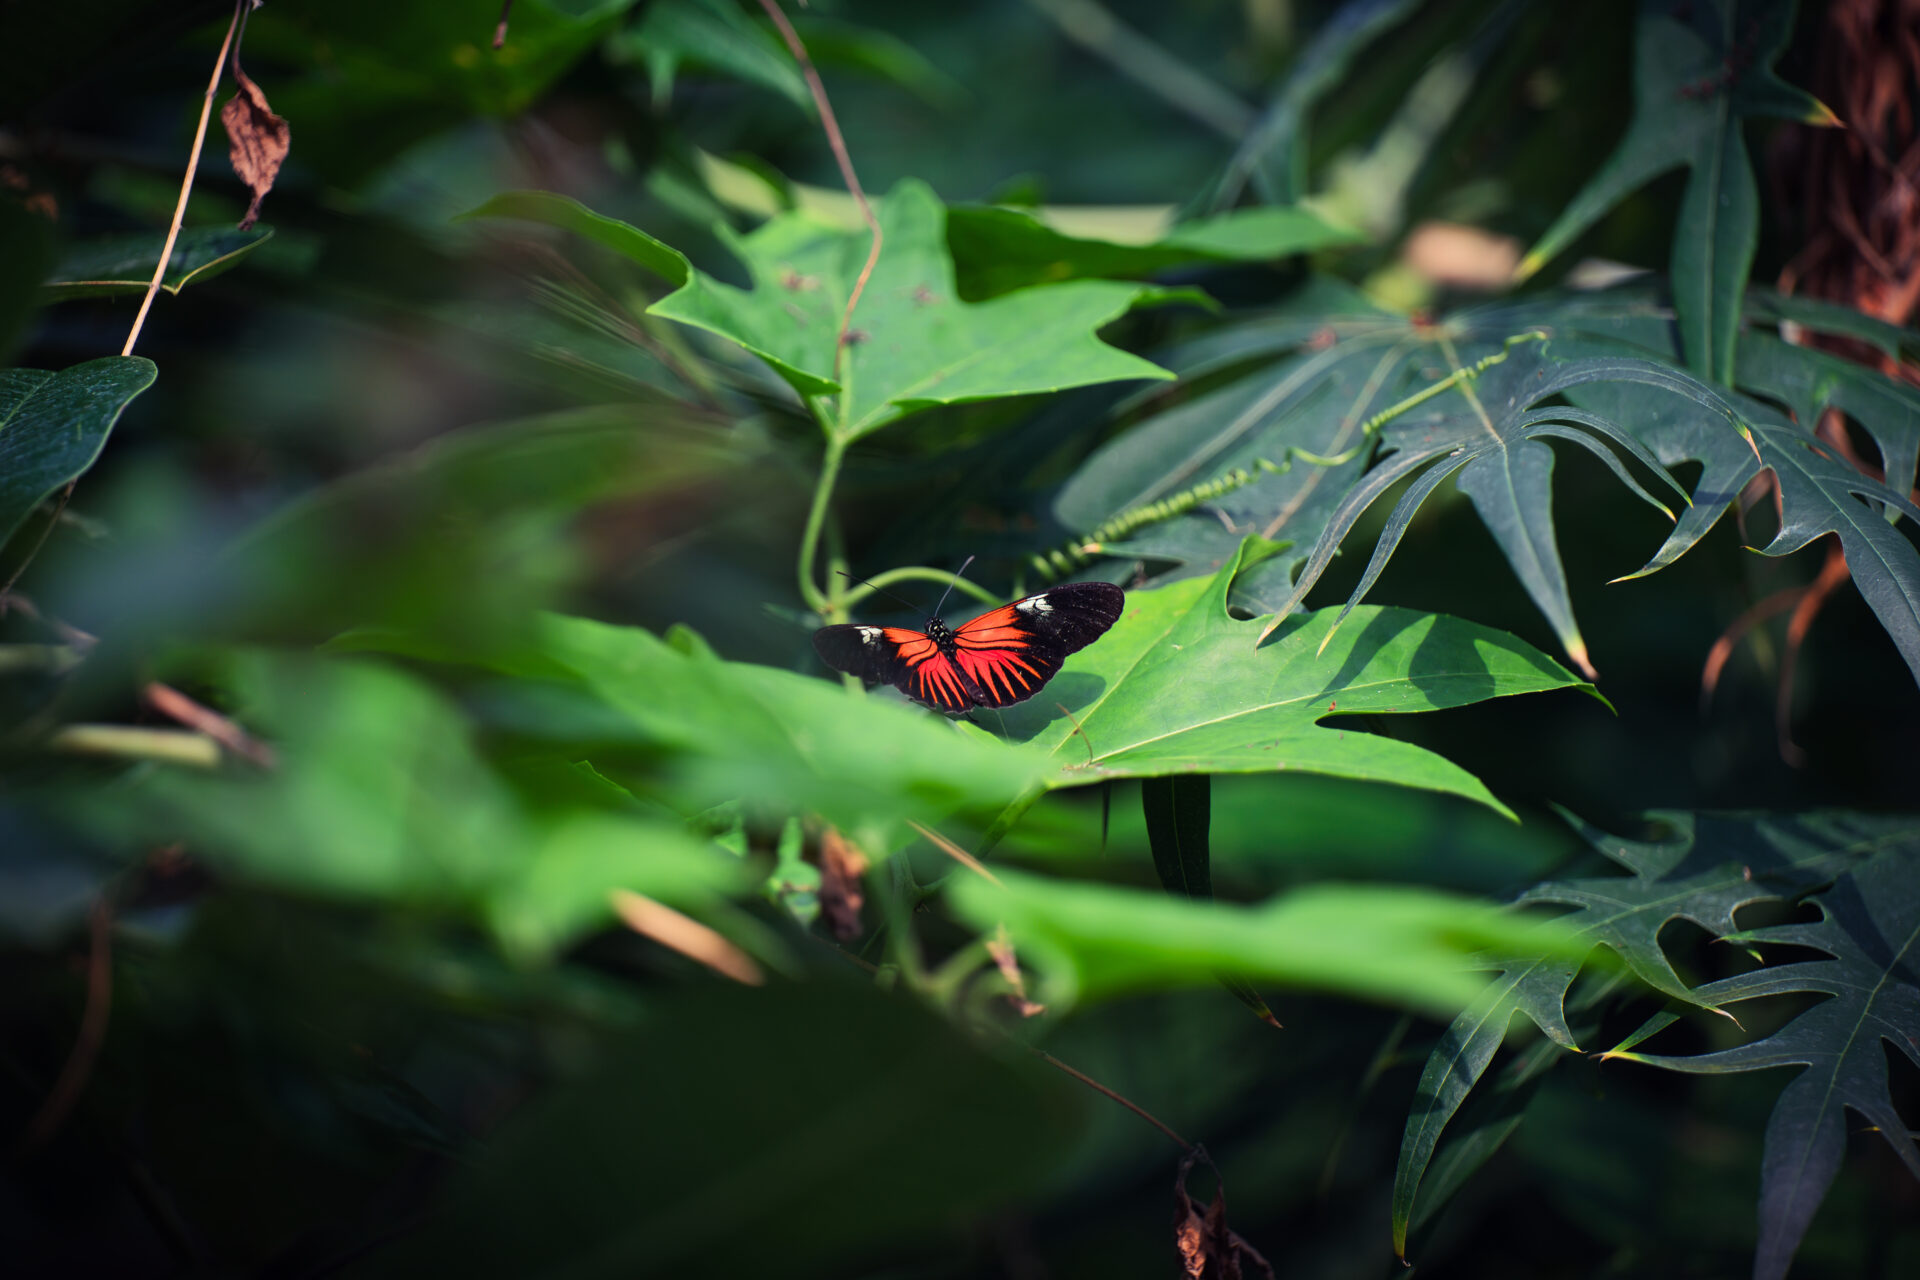 Royal Burgers Zoo Arnhem Dierentuin Butterfly Red Sitting on Loof Lover Insect Animals Nature Forest Netherlands